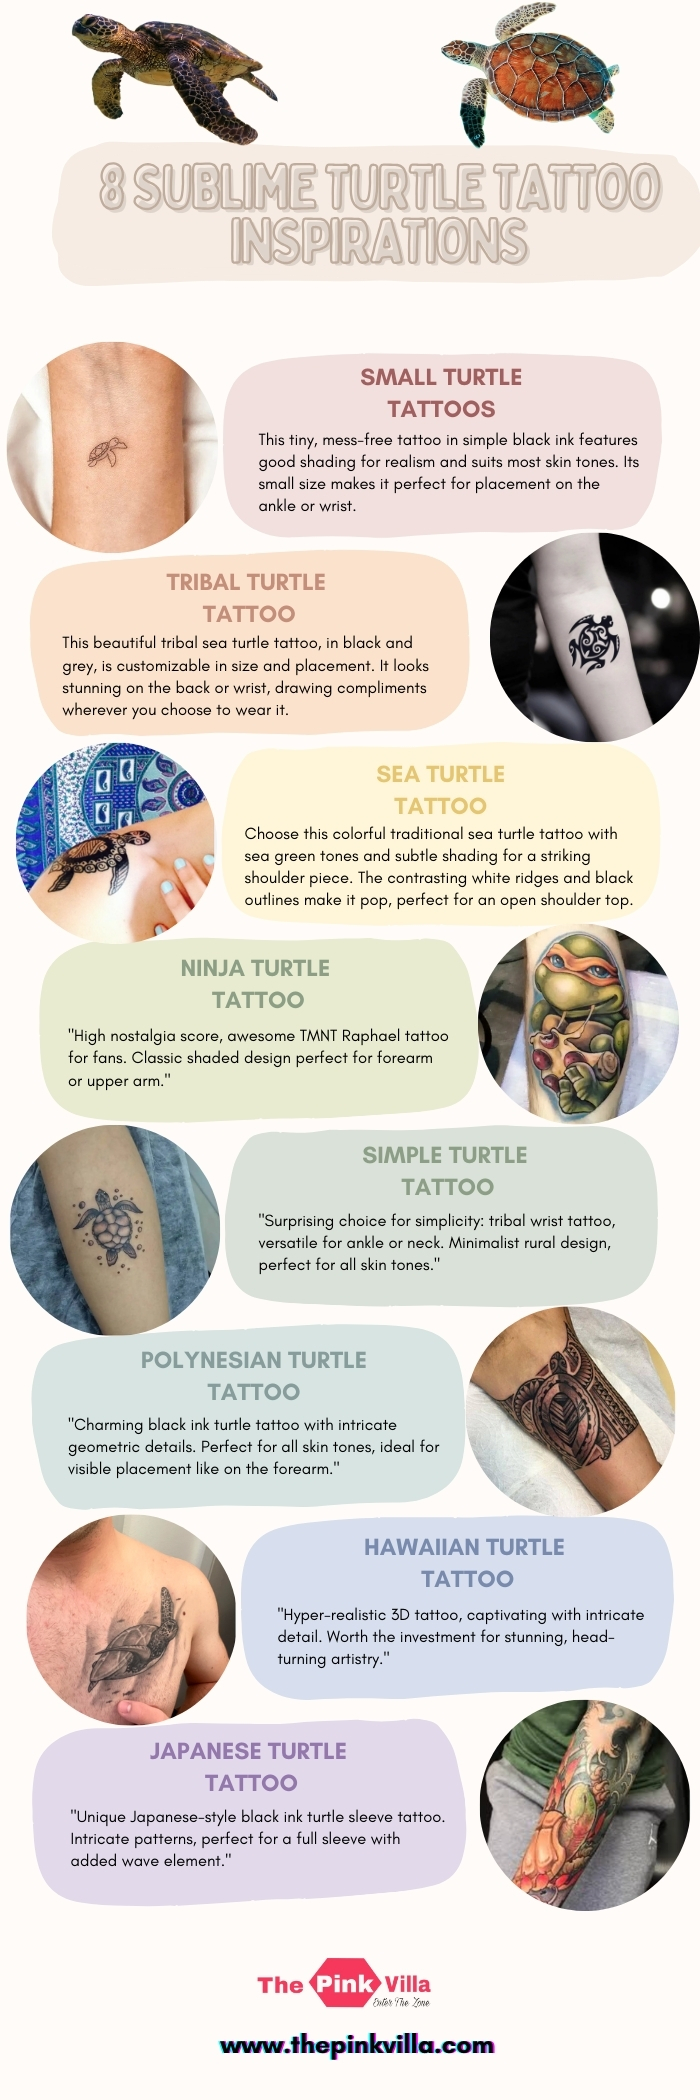 8 Sublime Turtle Tattoo Inspirations